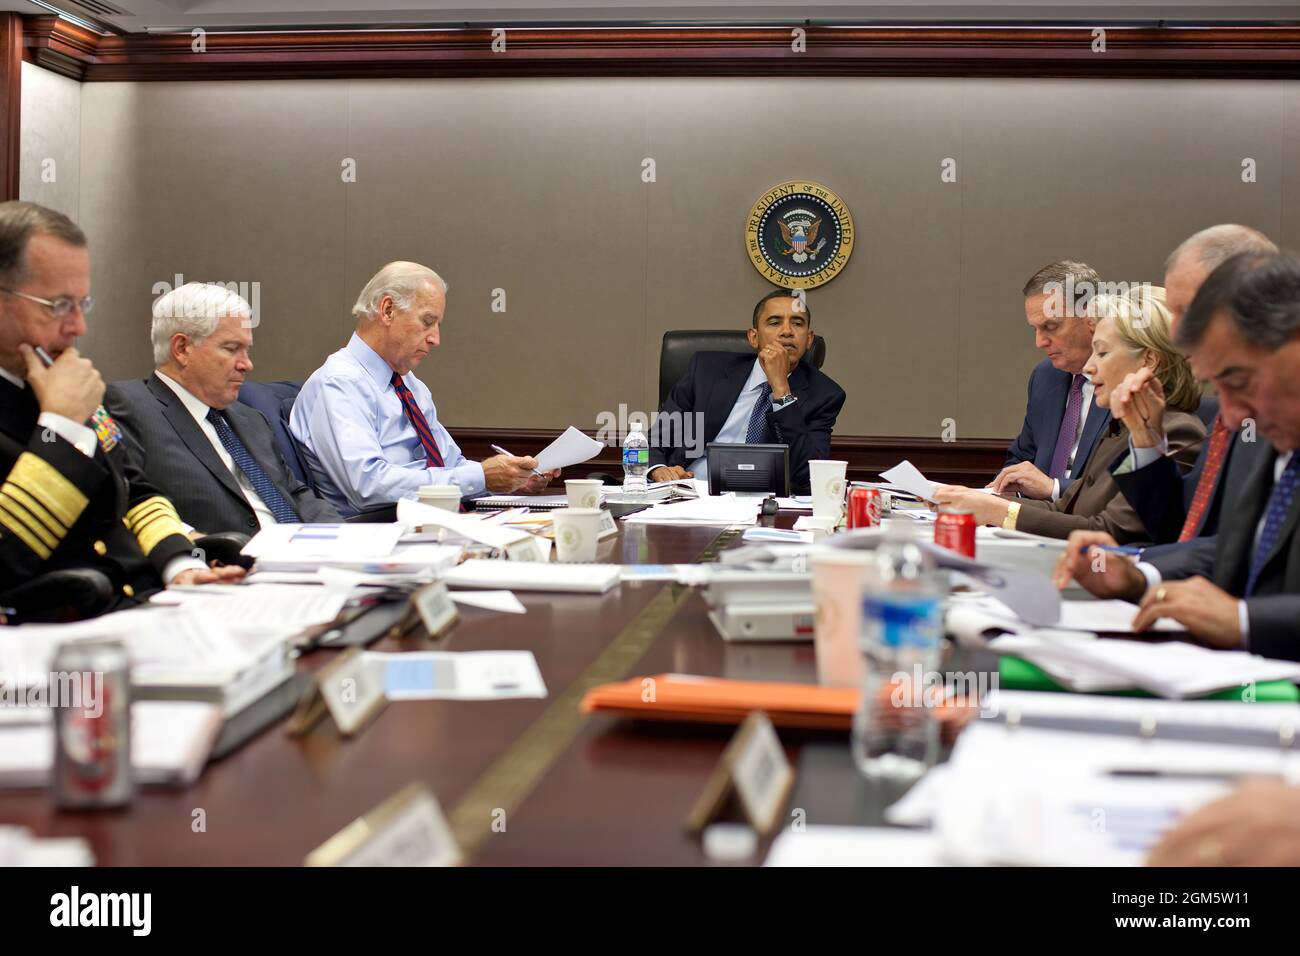 President Barack Obama listens during a meeting about the current situation in Pakistan Oct. 7, 2009 in the Situation Room of the White House. Left to right, Adm. Michael Mullen, chairman of the Joint Chiefs of Staff; Defense Secretary Robert Gates; Vice President Joe Biden; the President; National Security Advisor Gen. James Jones; Secretary of State Hillary Clinton; Director of National Intelligence Adm. Dennis C. Blair (partially obscured); and CIA Director Leon Panetta.(Official White House photo by Pete Souza) Stock Photo